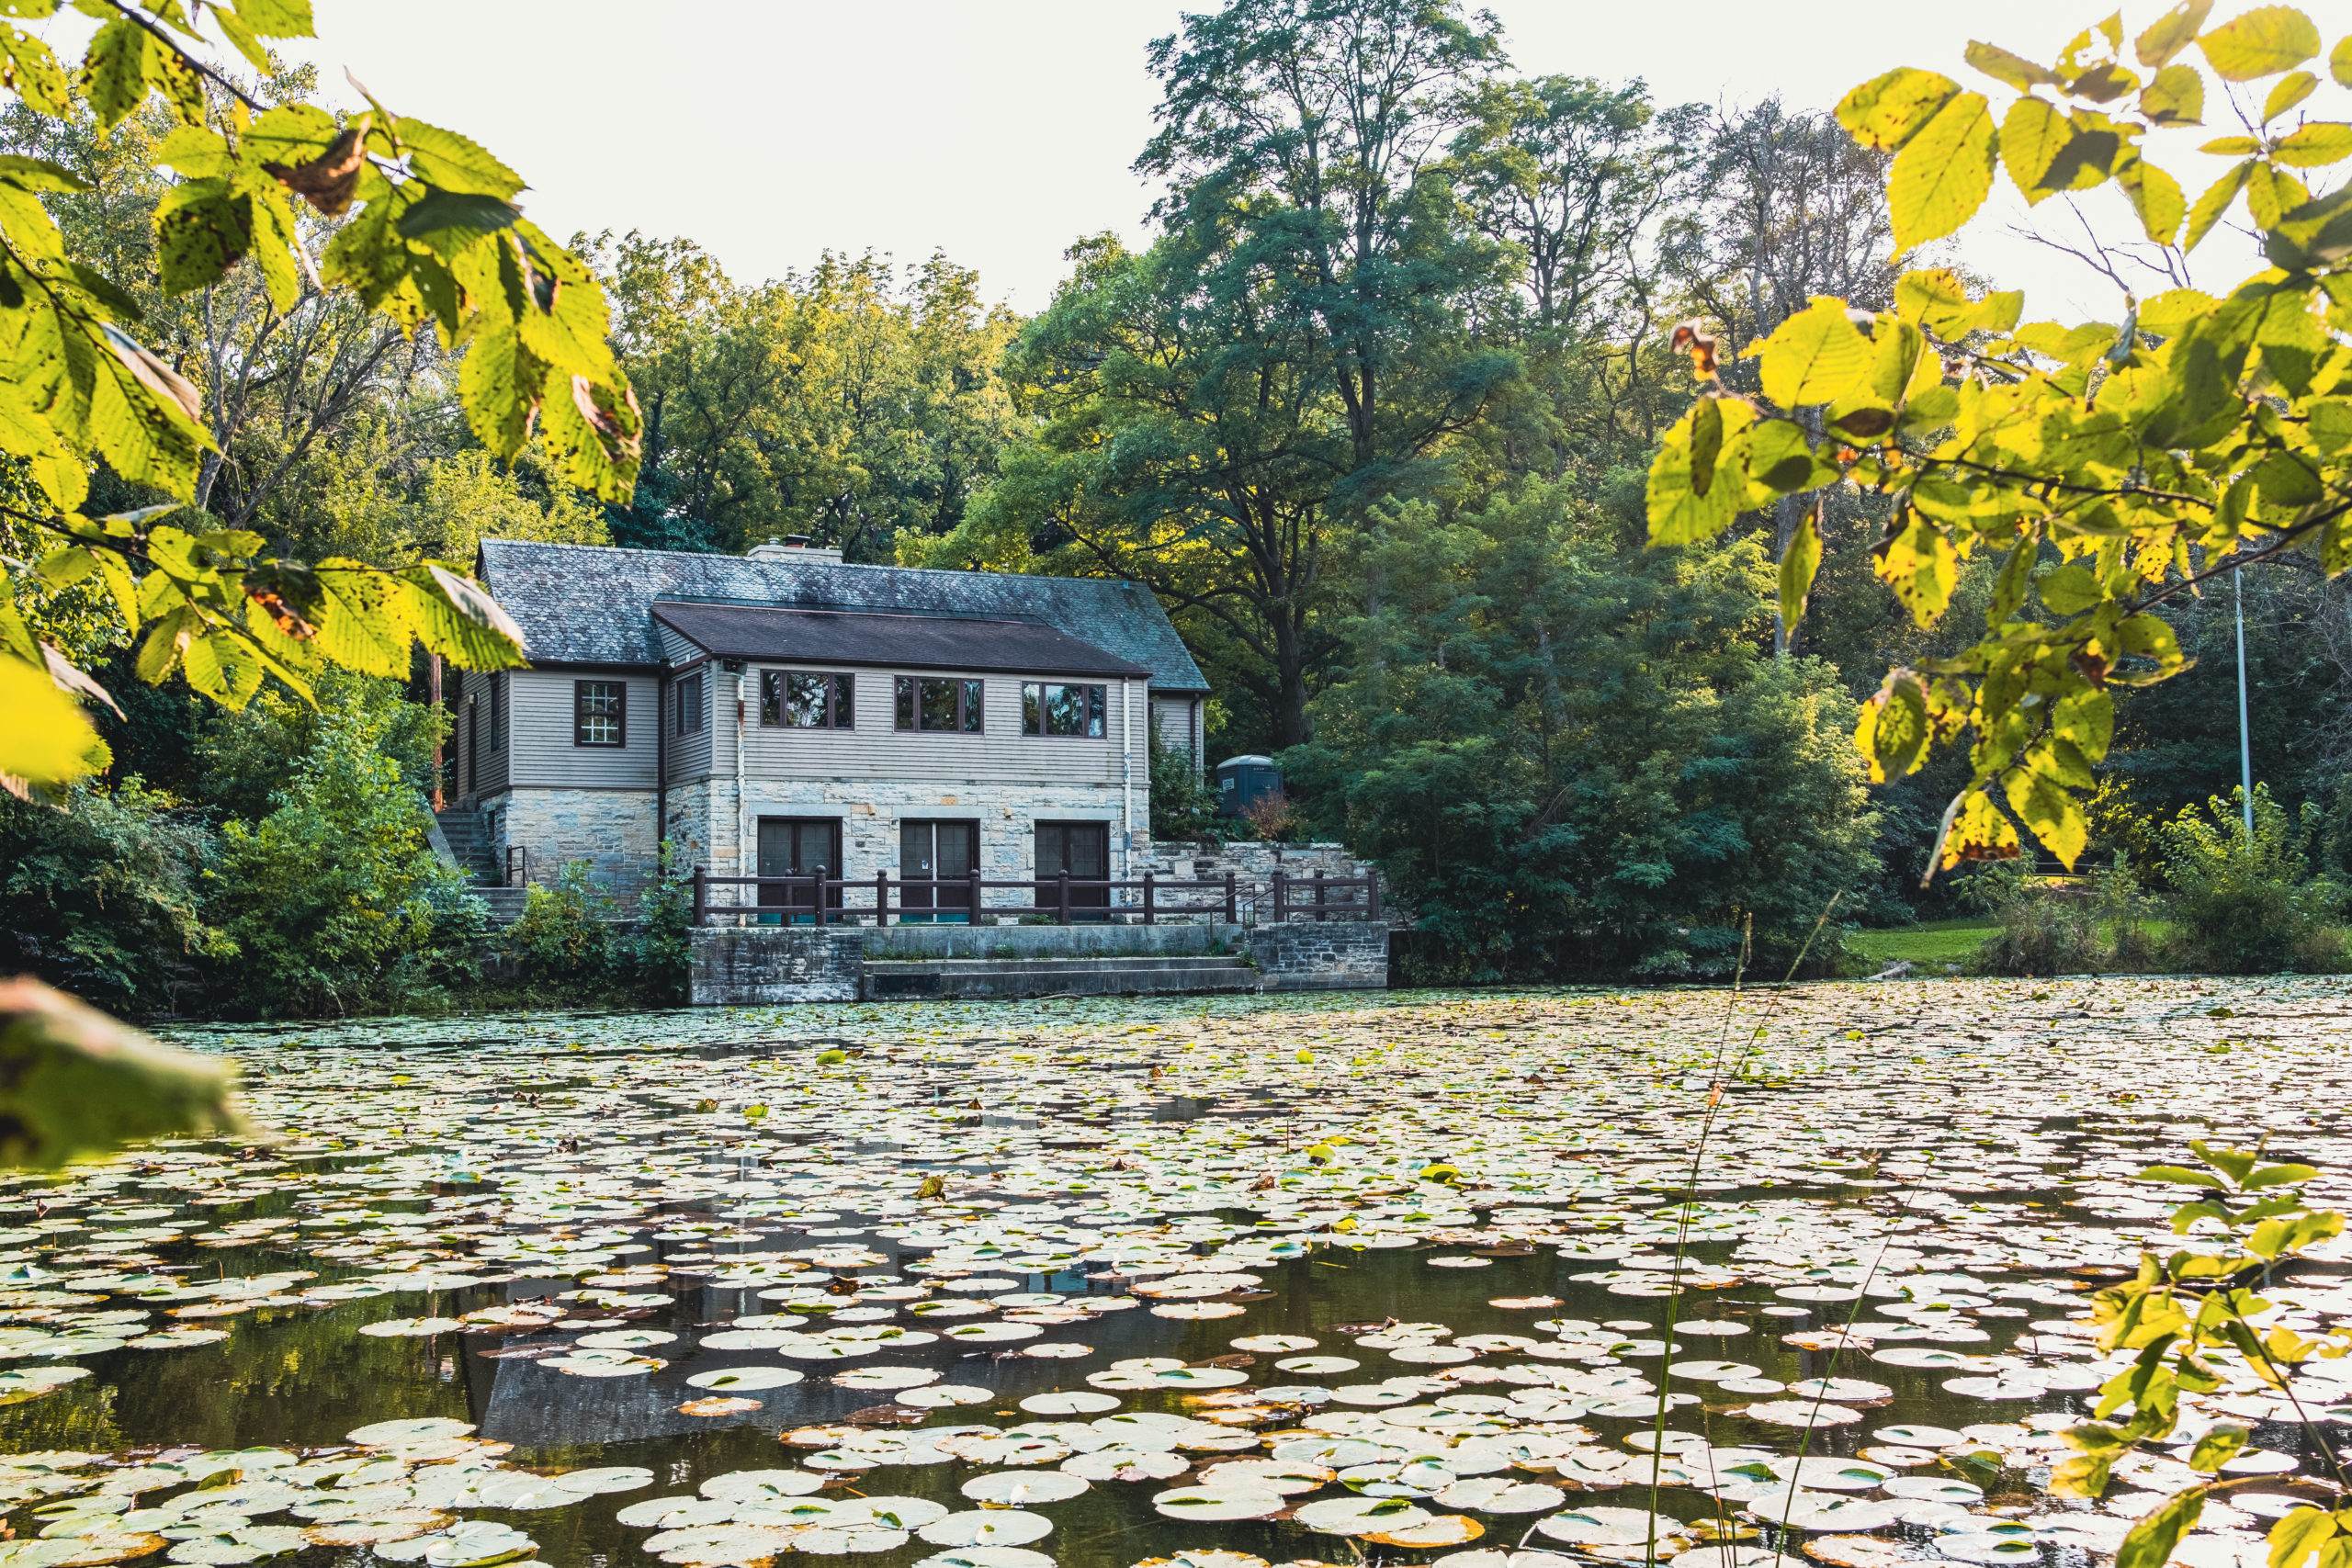 A lilypad covered pond with a building in the background and surrounded by trees at Jacobus Park in Wauwatosa, WI